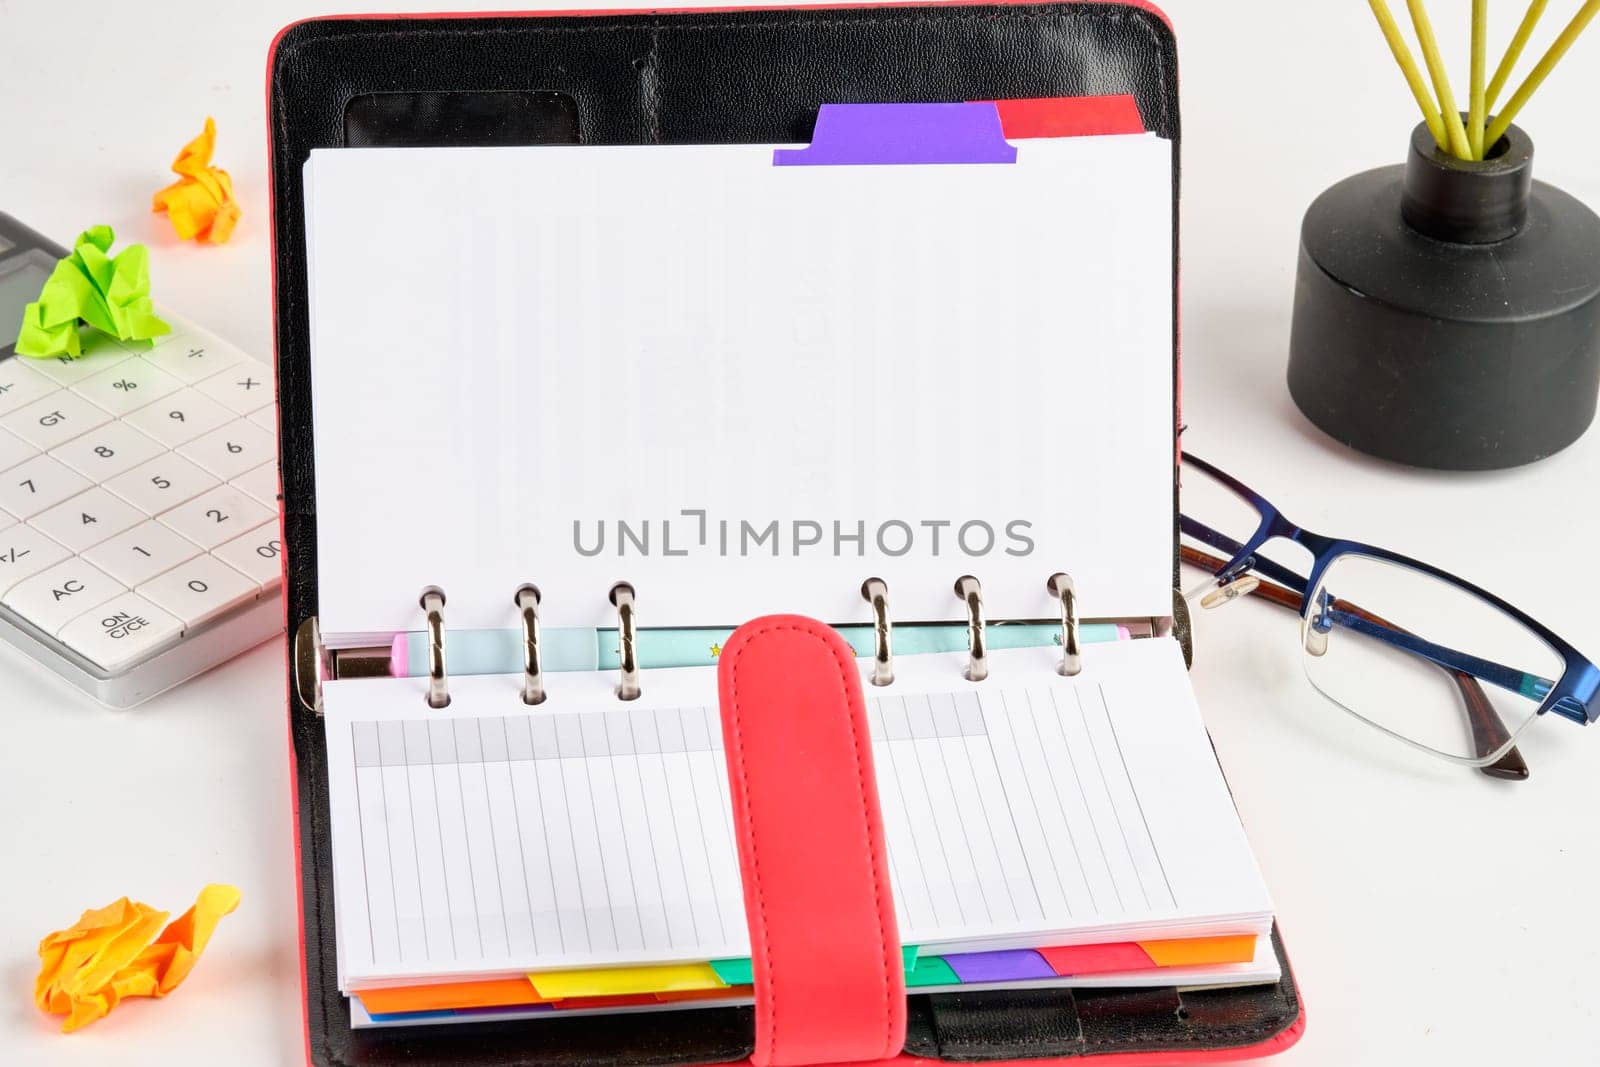 An open notebook with a place to copy on a white background next to a calculator, glasses